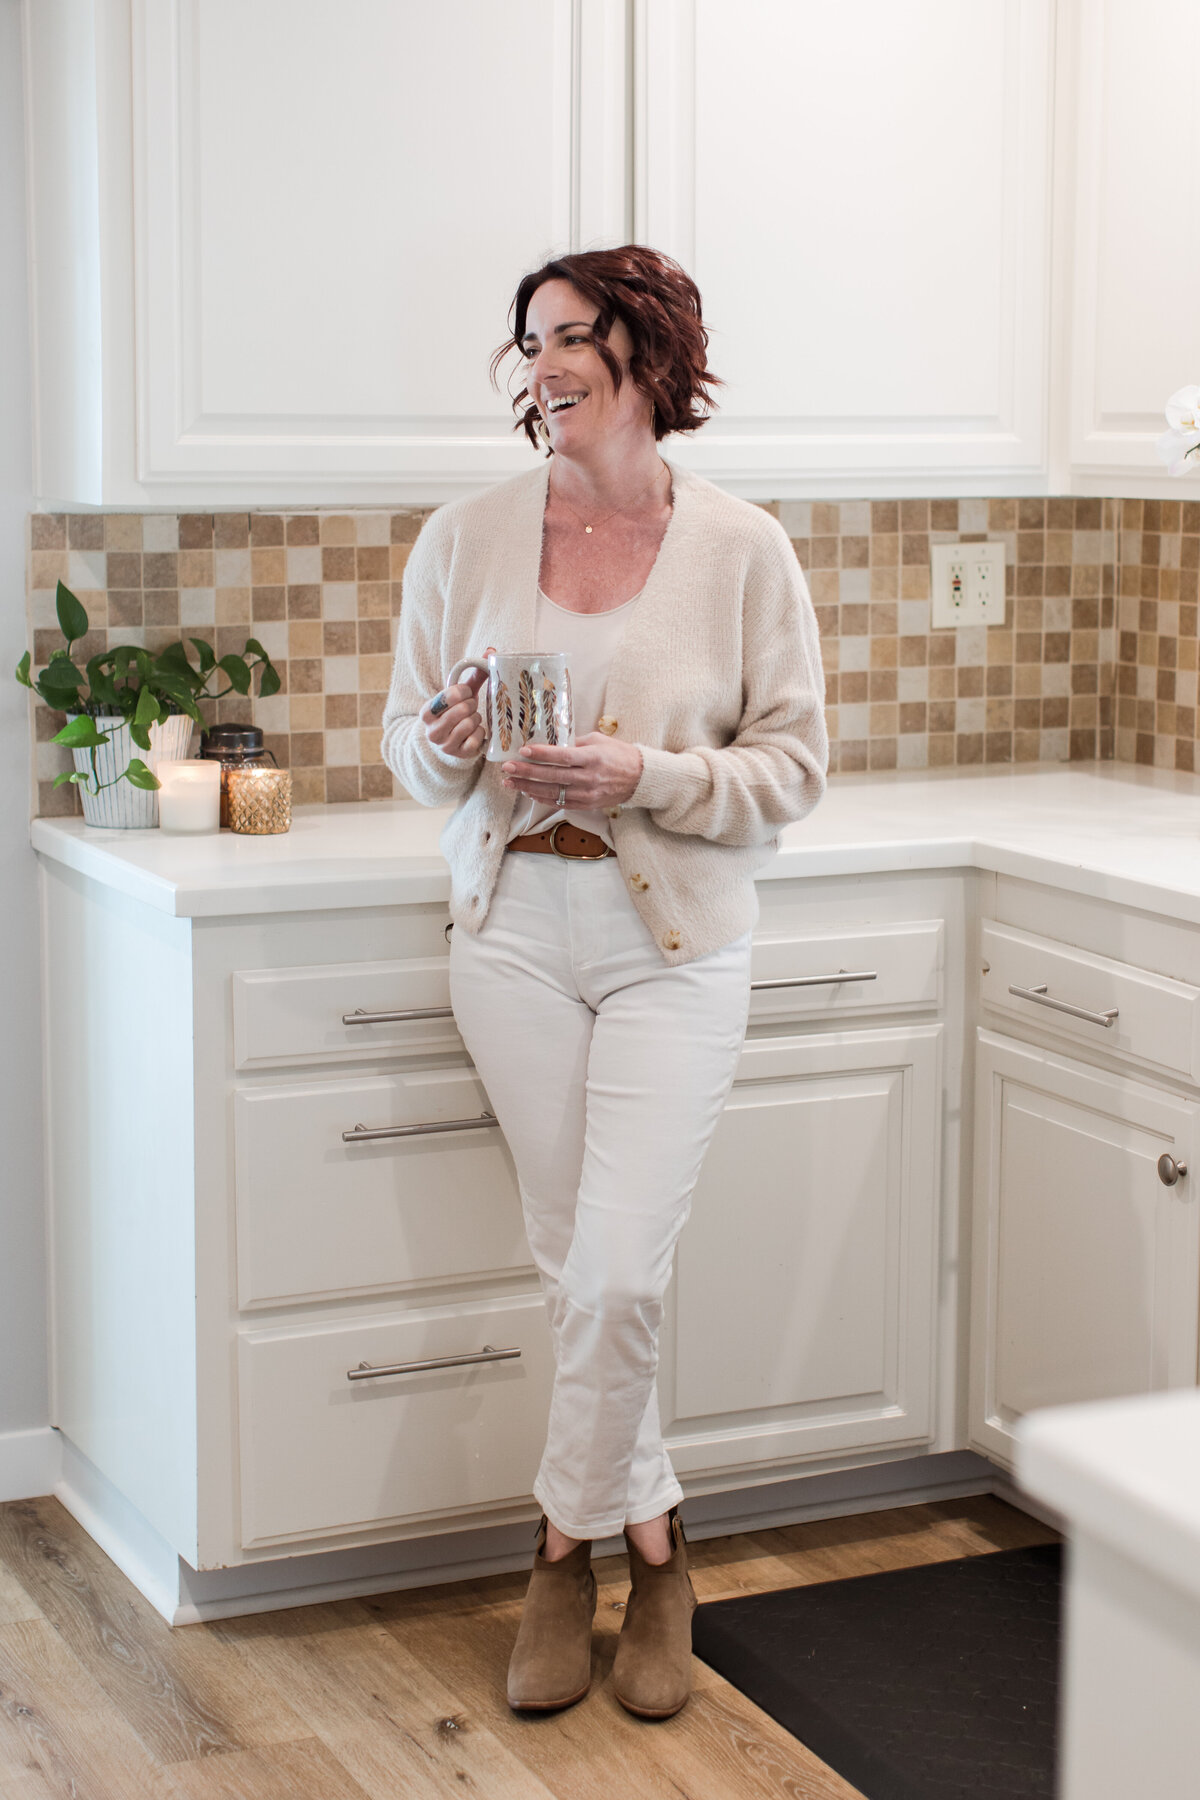 realtor-personal-branding-photography-in-kitchen